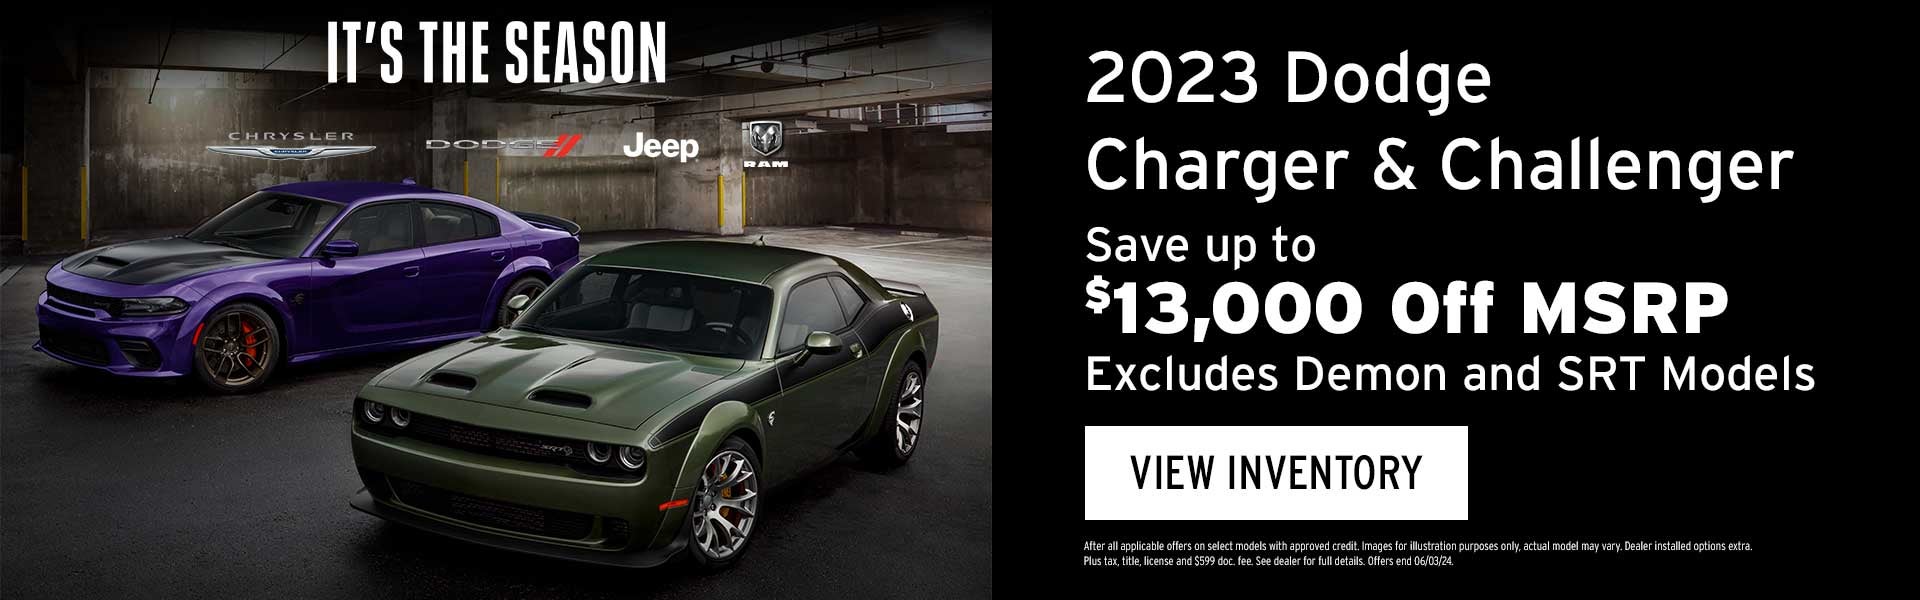 Save $13,000 on 2023 Charger & Challenger